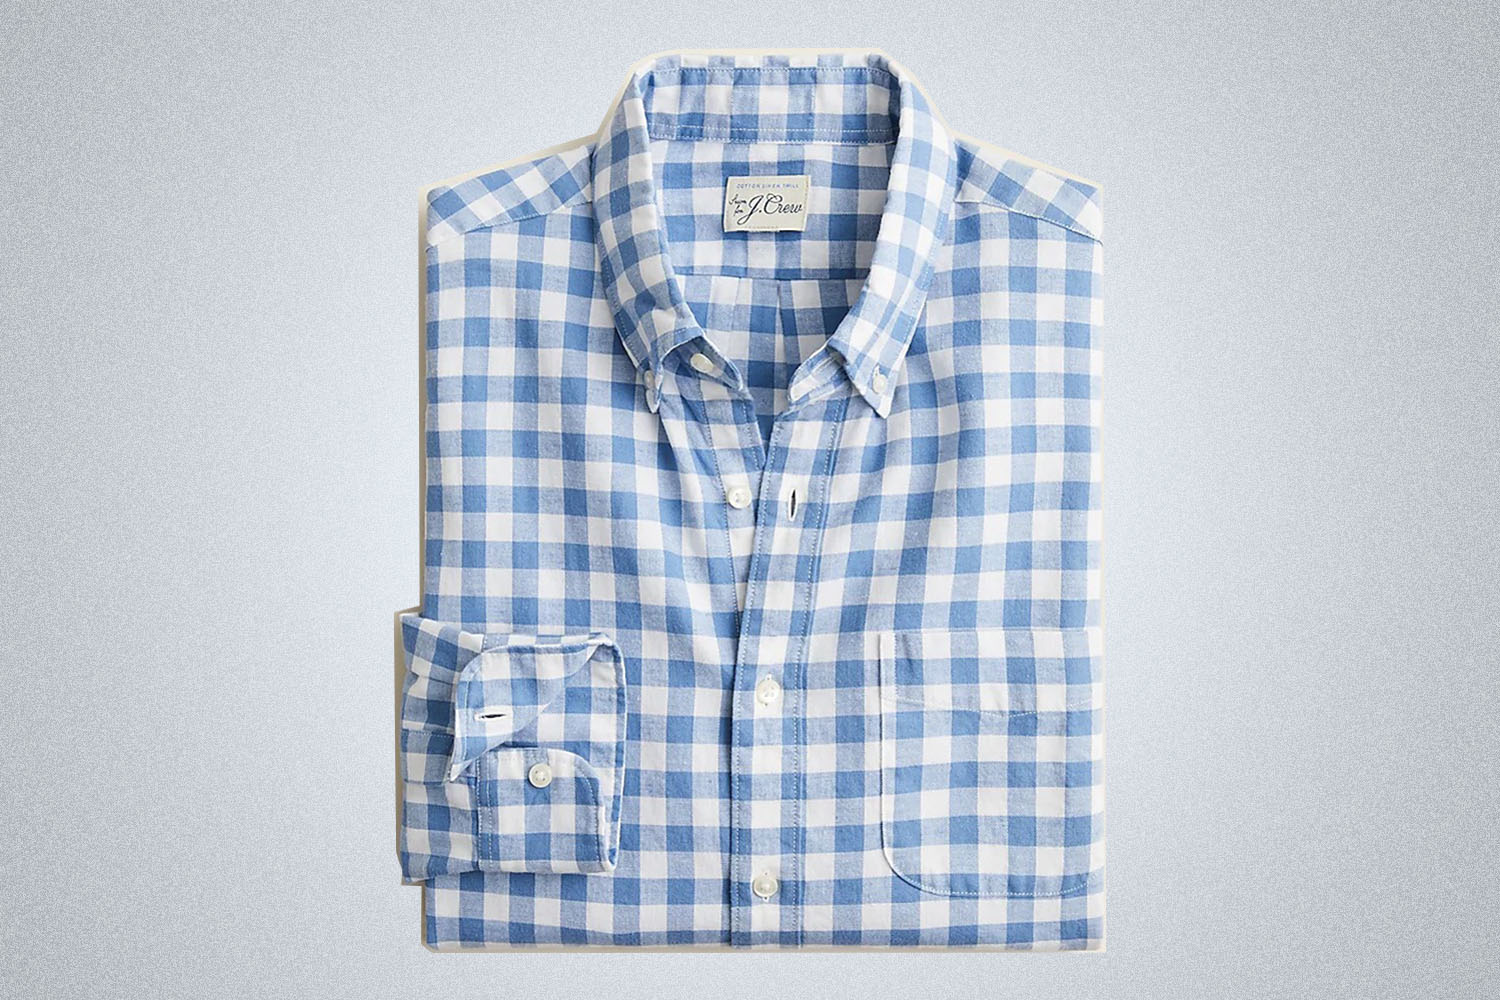 a checked blue and white shirt from J.Crew on a grey background